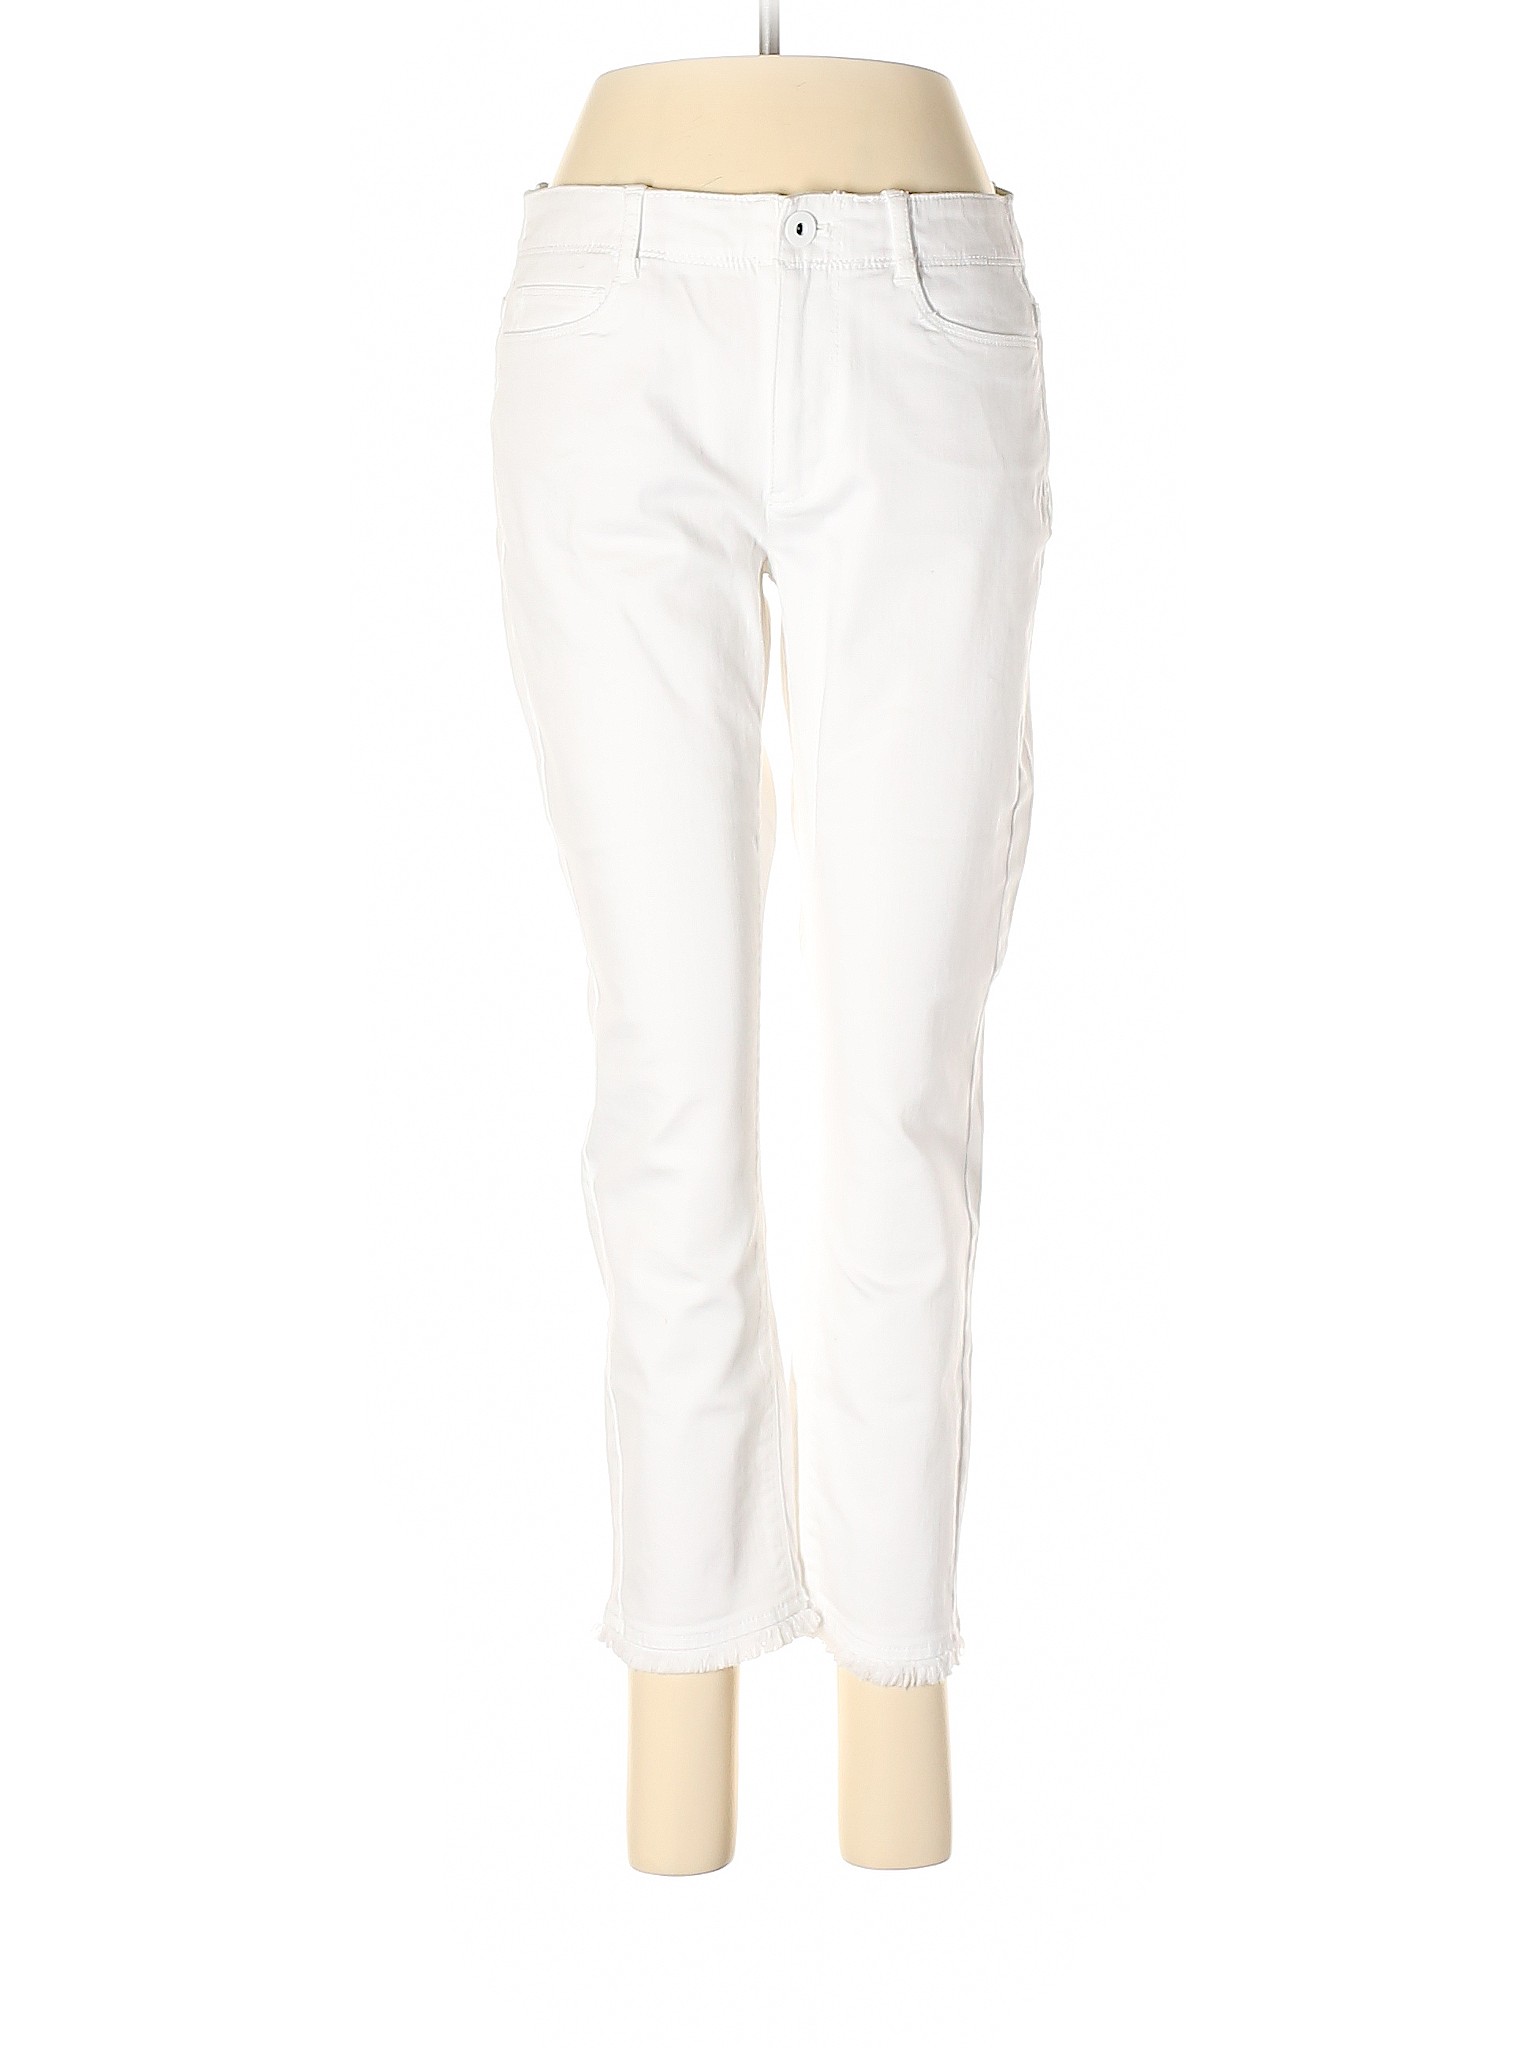 J.Jill Solid White Jeans Size 4 - 91% off | thredUP